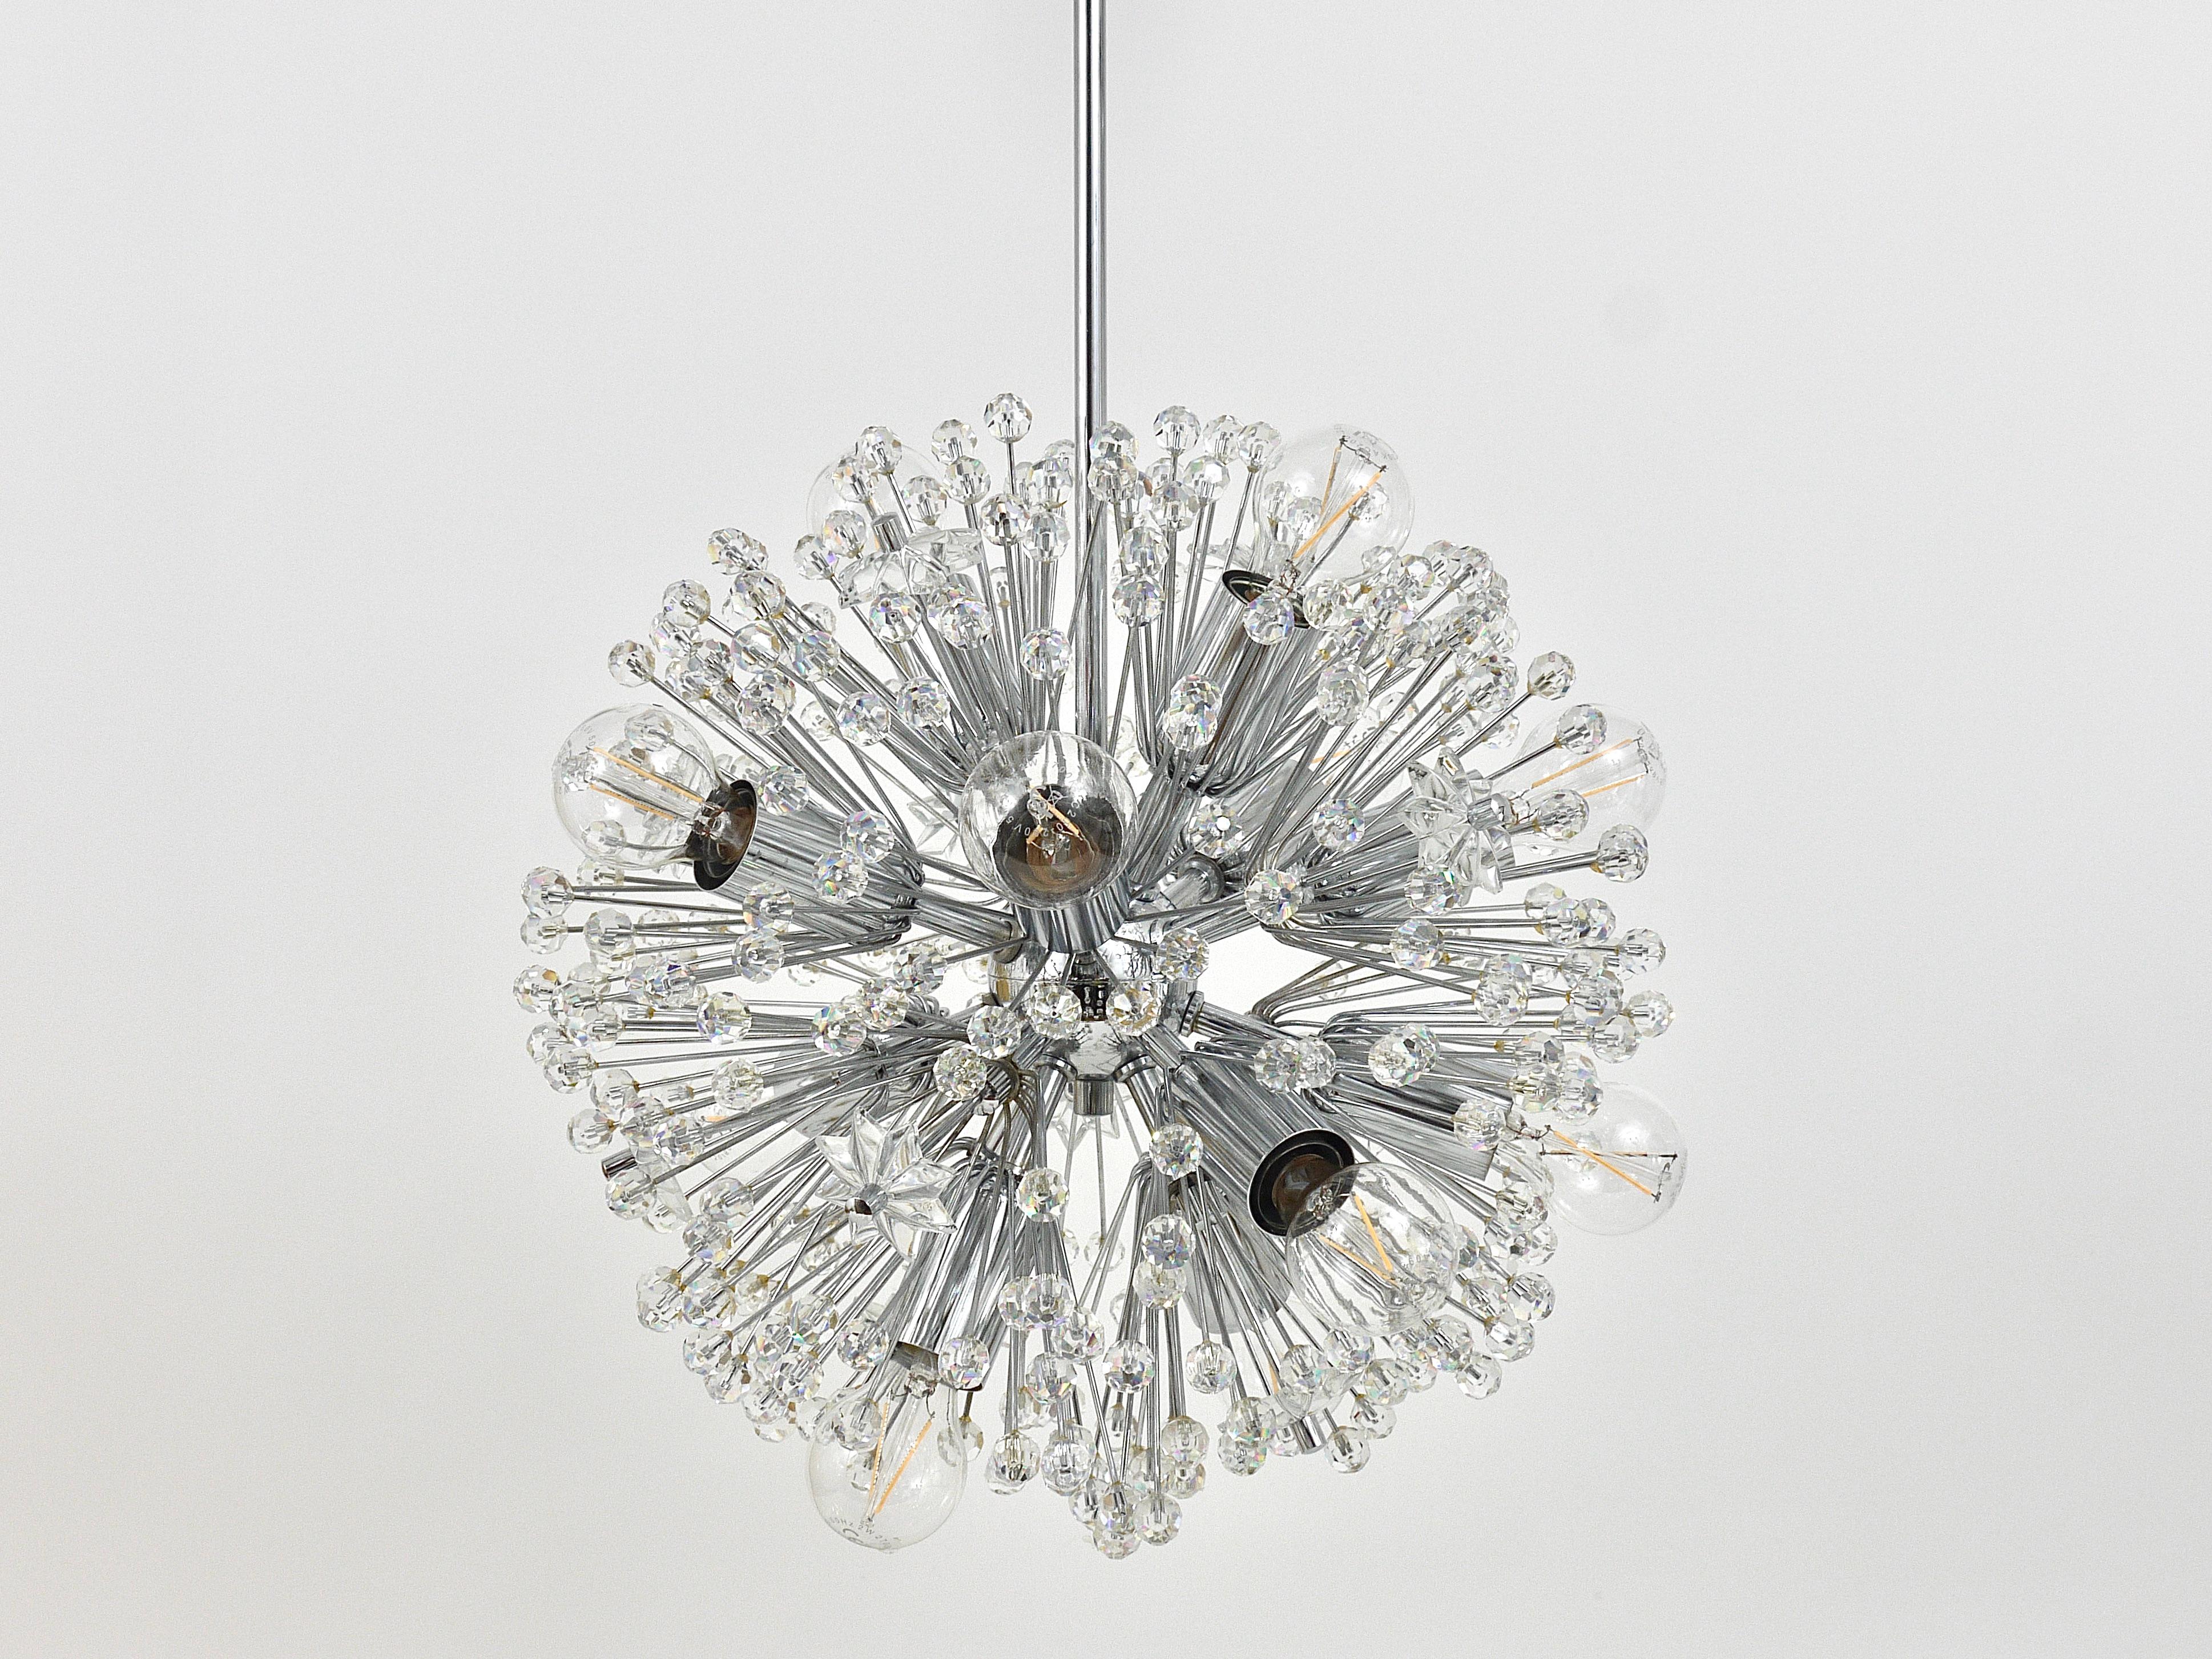 Beautiful nickel / chrome-plated snowflake blowball sputnik chandelier, made in Austria in the 1970s. This chandelier has a diameter of 13 in, its total height incl. rod is 38 in. It offers 11 light sources and makes a wonderful light. Looks great